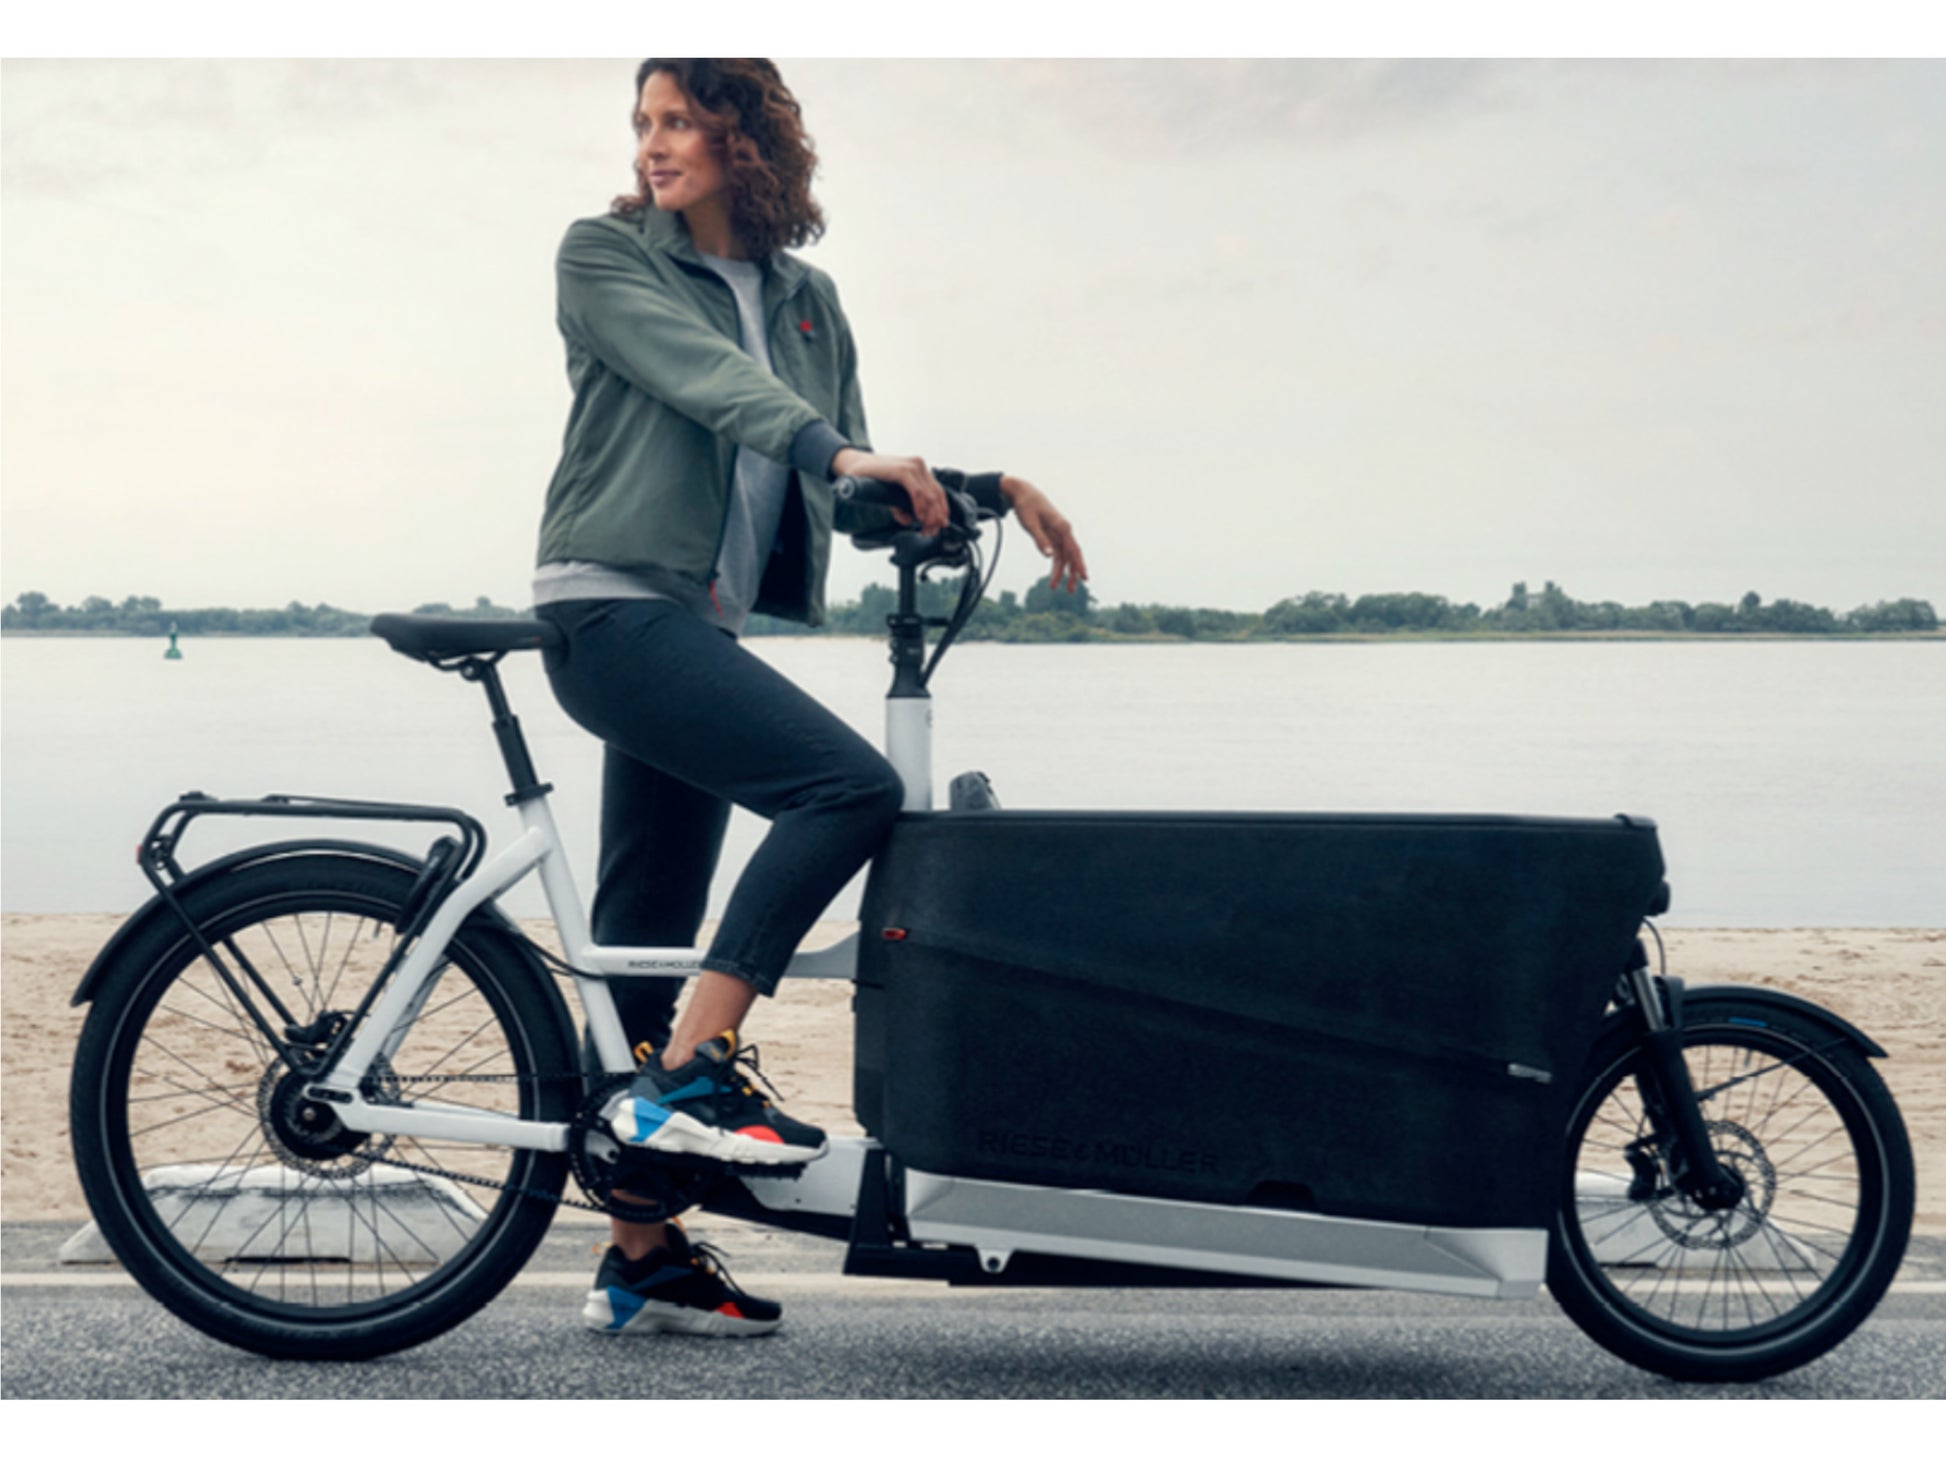 Riese & Muller Packster 70 Vario cargo eMTB hardtail woman standing with bike by waterfront